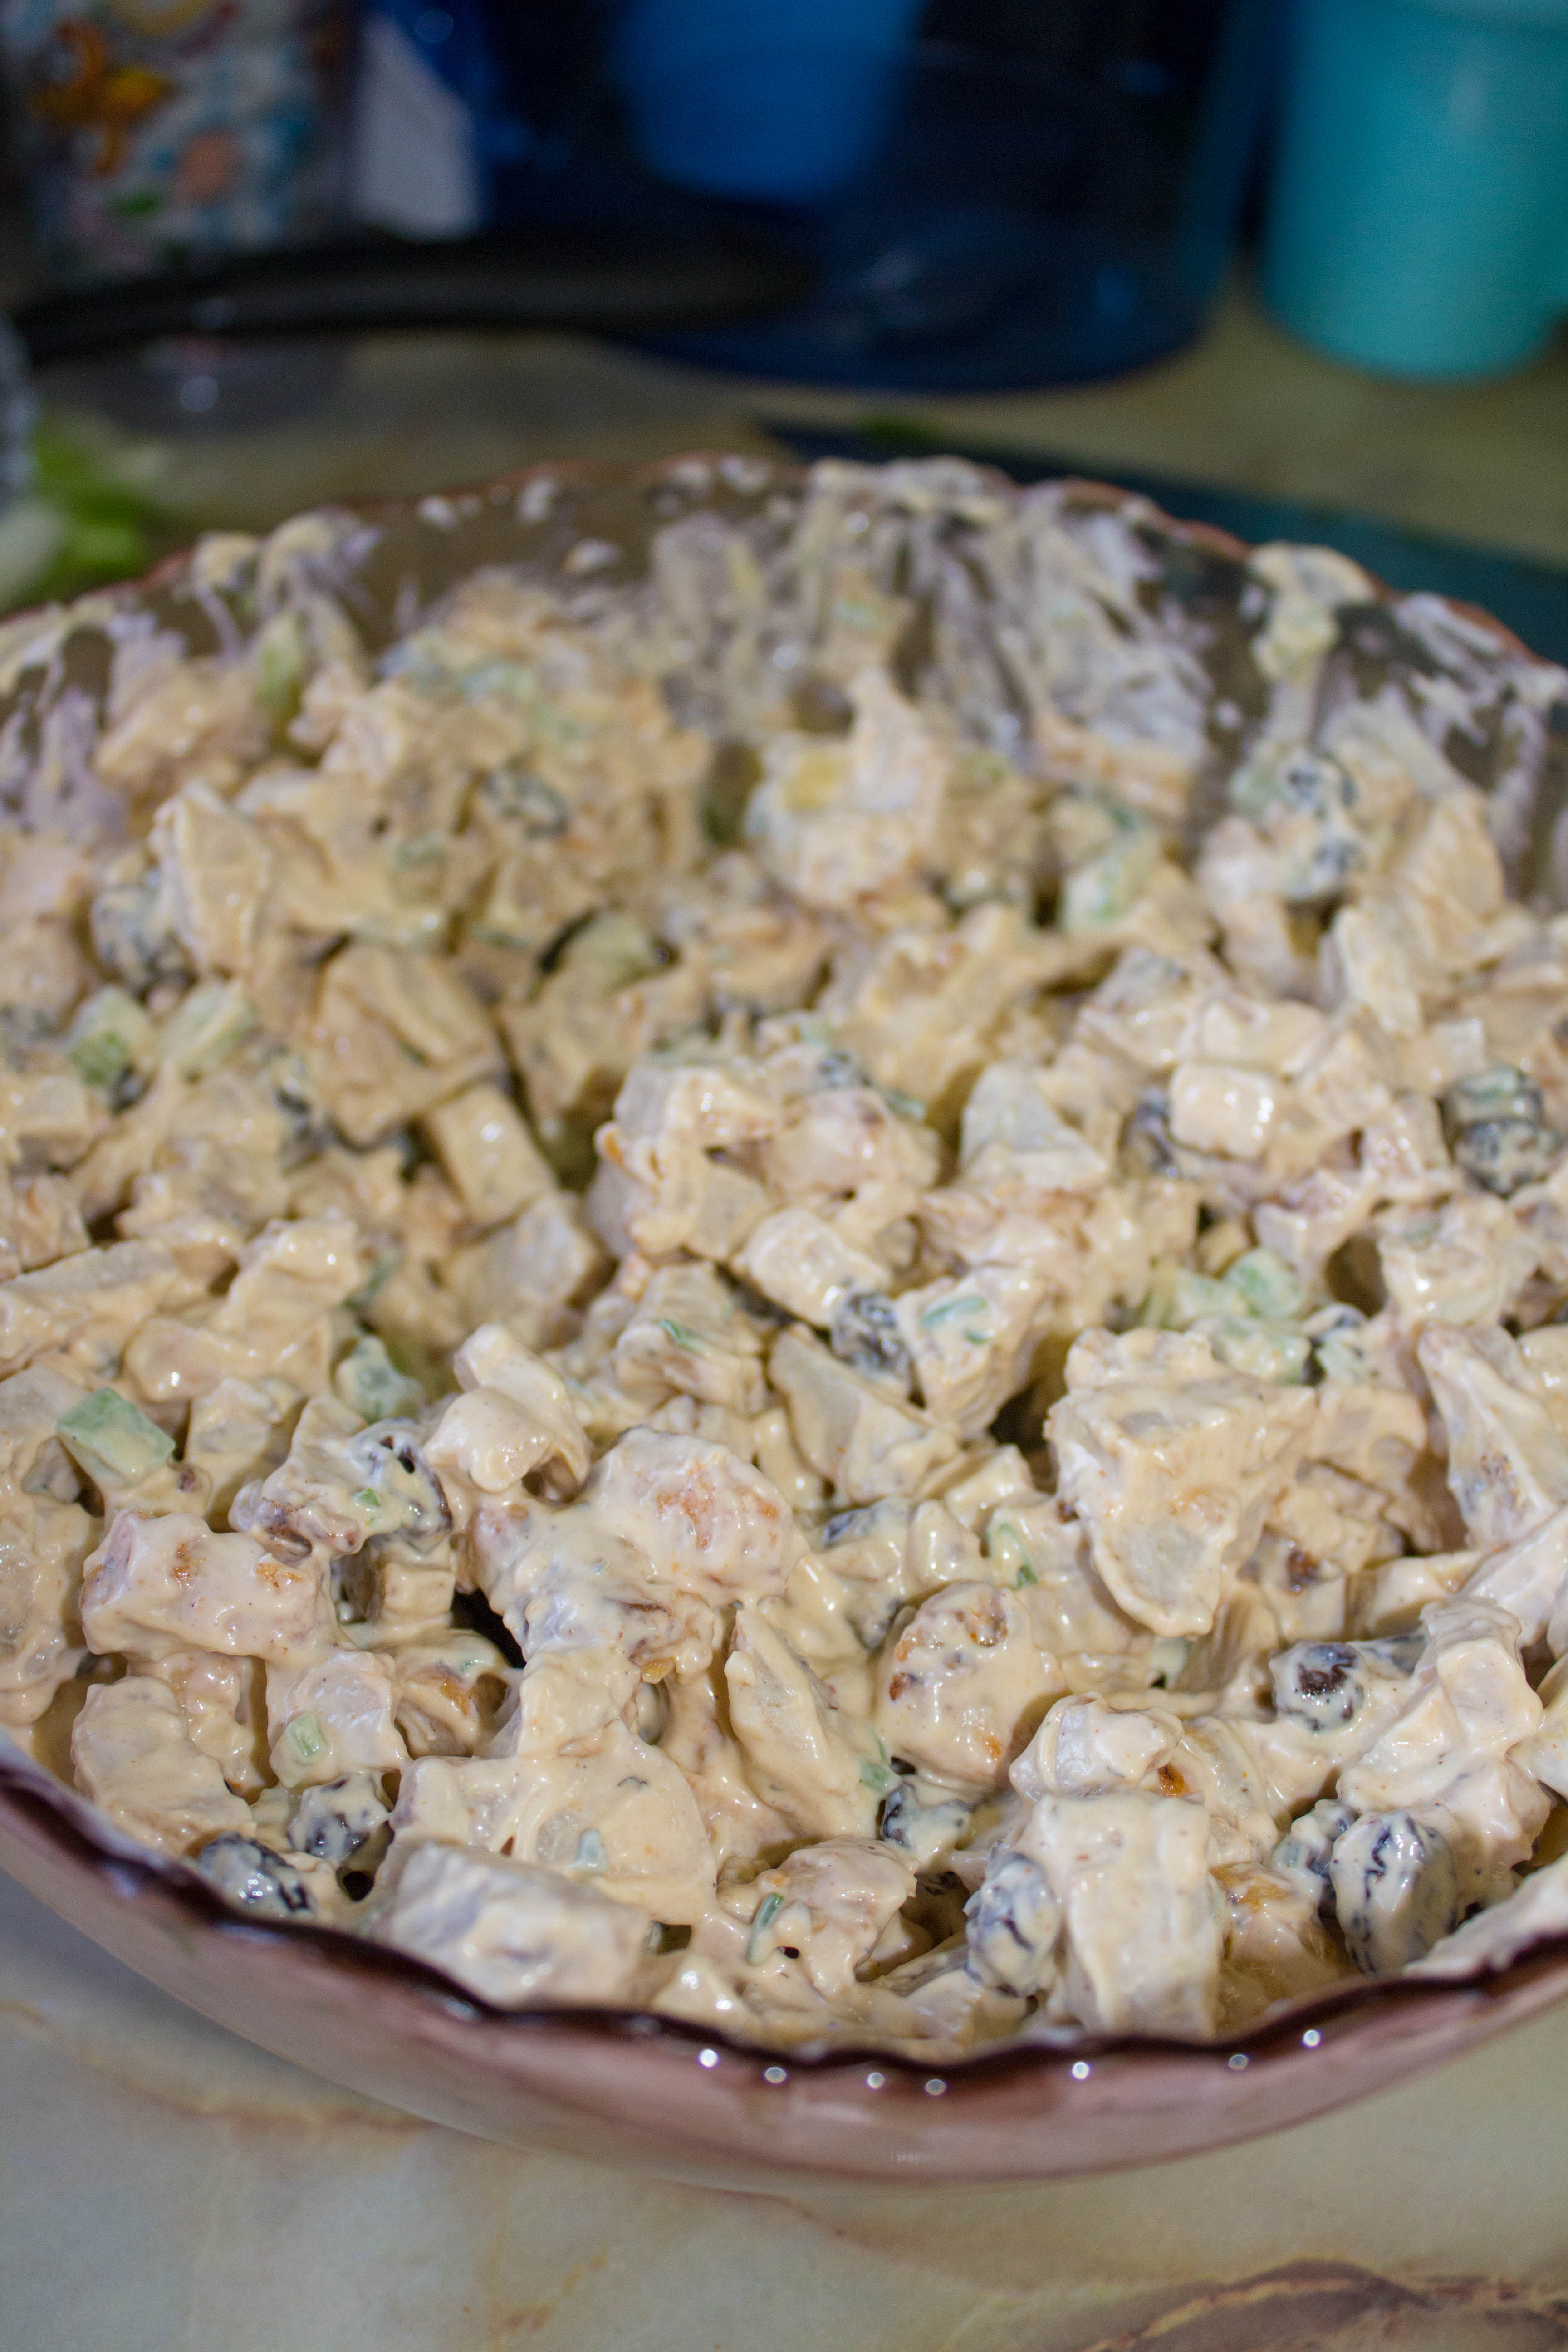 Looking for a great tasting, easy chicken salad recipe? This kicking spicy chicken salad recipe will be hit for lunch, dinner or a picnic.